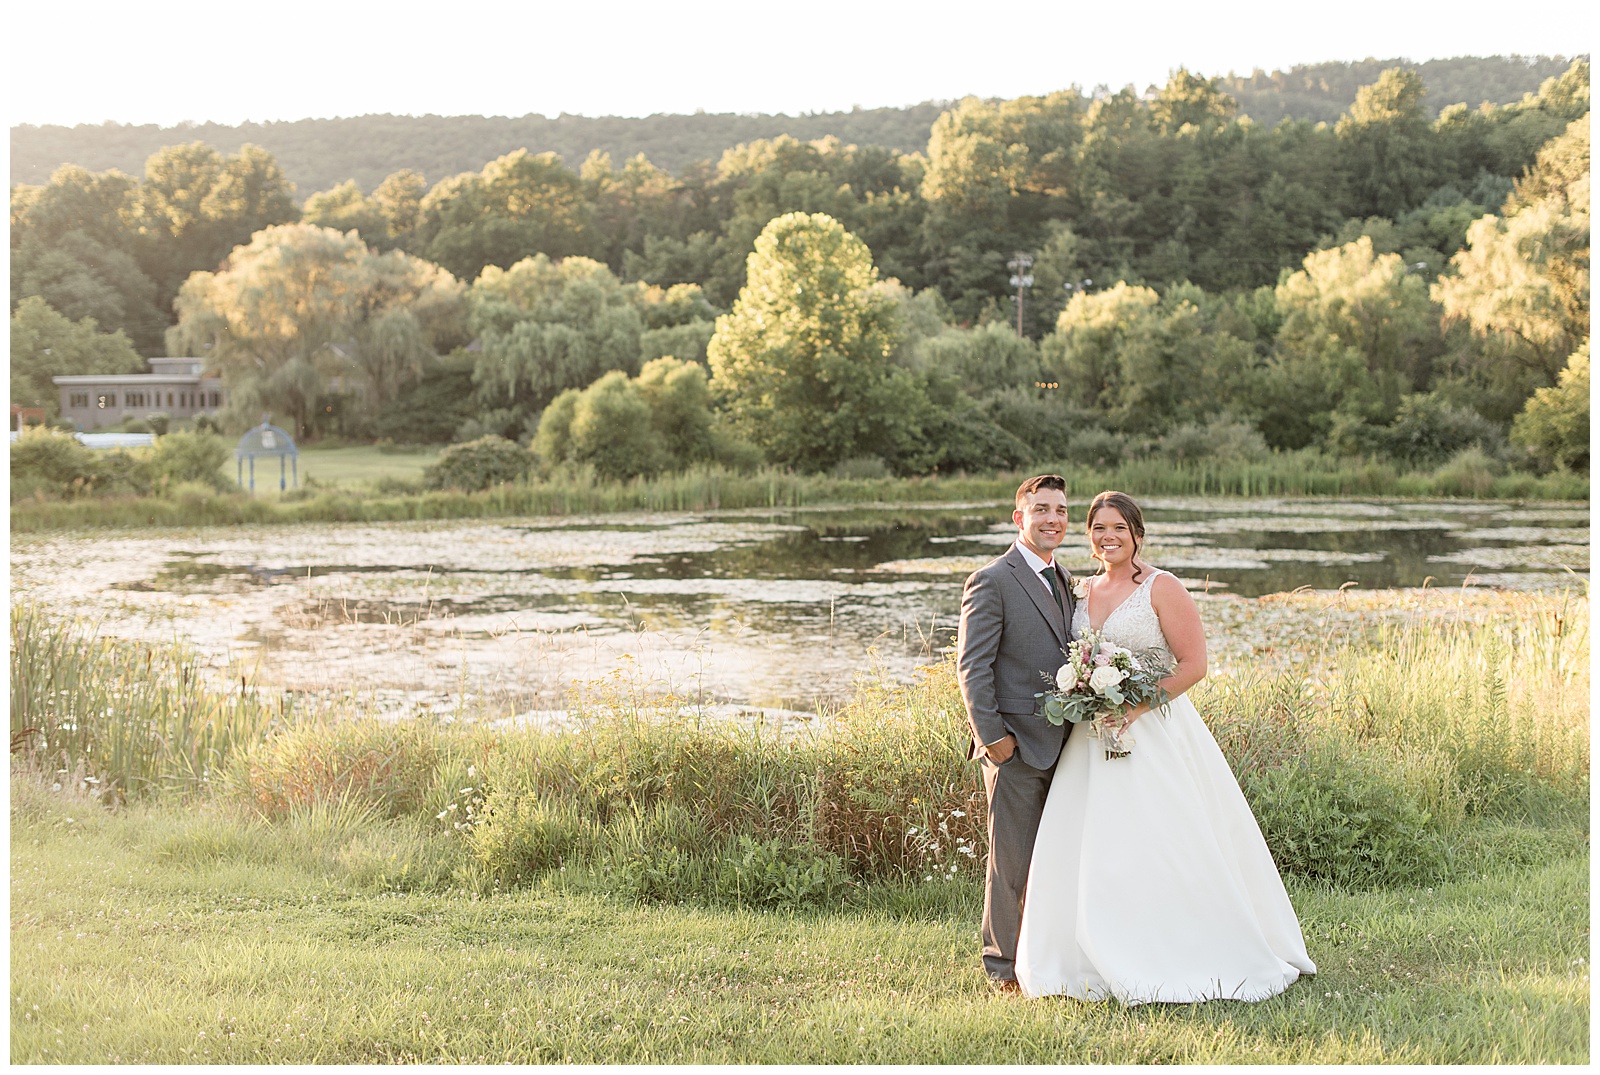 couple standing on right side of photo with large pond and trees behind them at sunset at the manor at mountain view